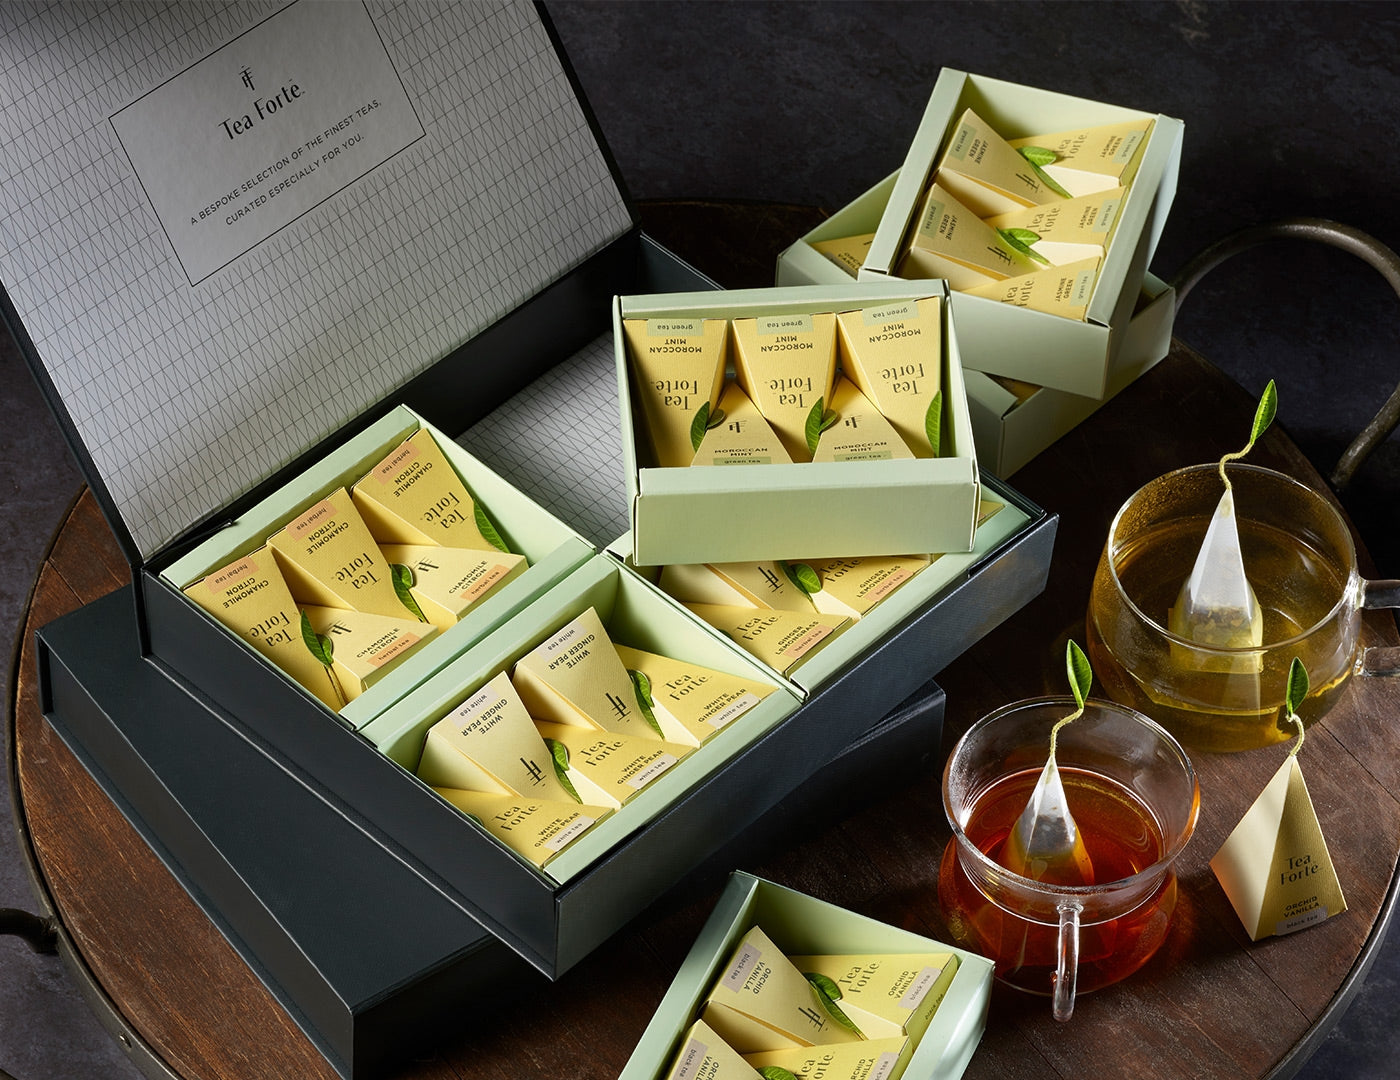 Tea Forté Select Box of 20 pyramid tea infusers, open on a wooden tray with glass teacups